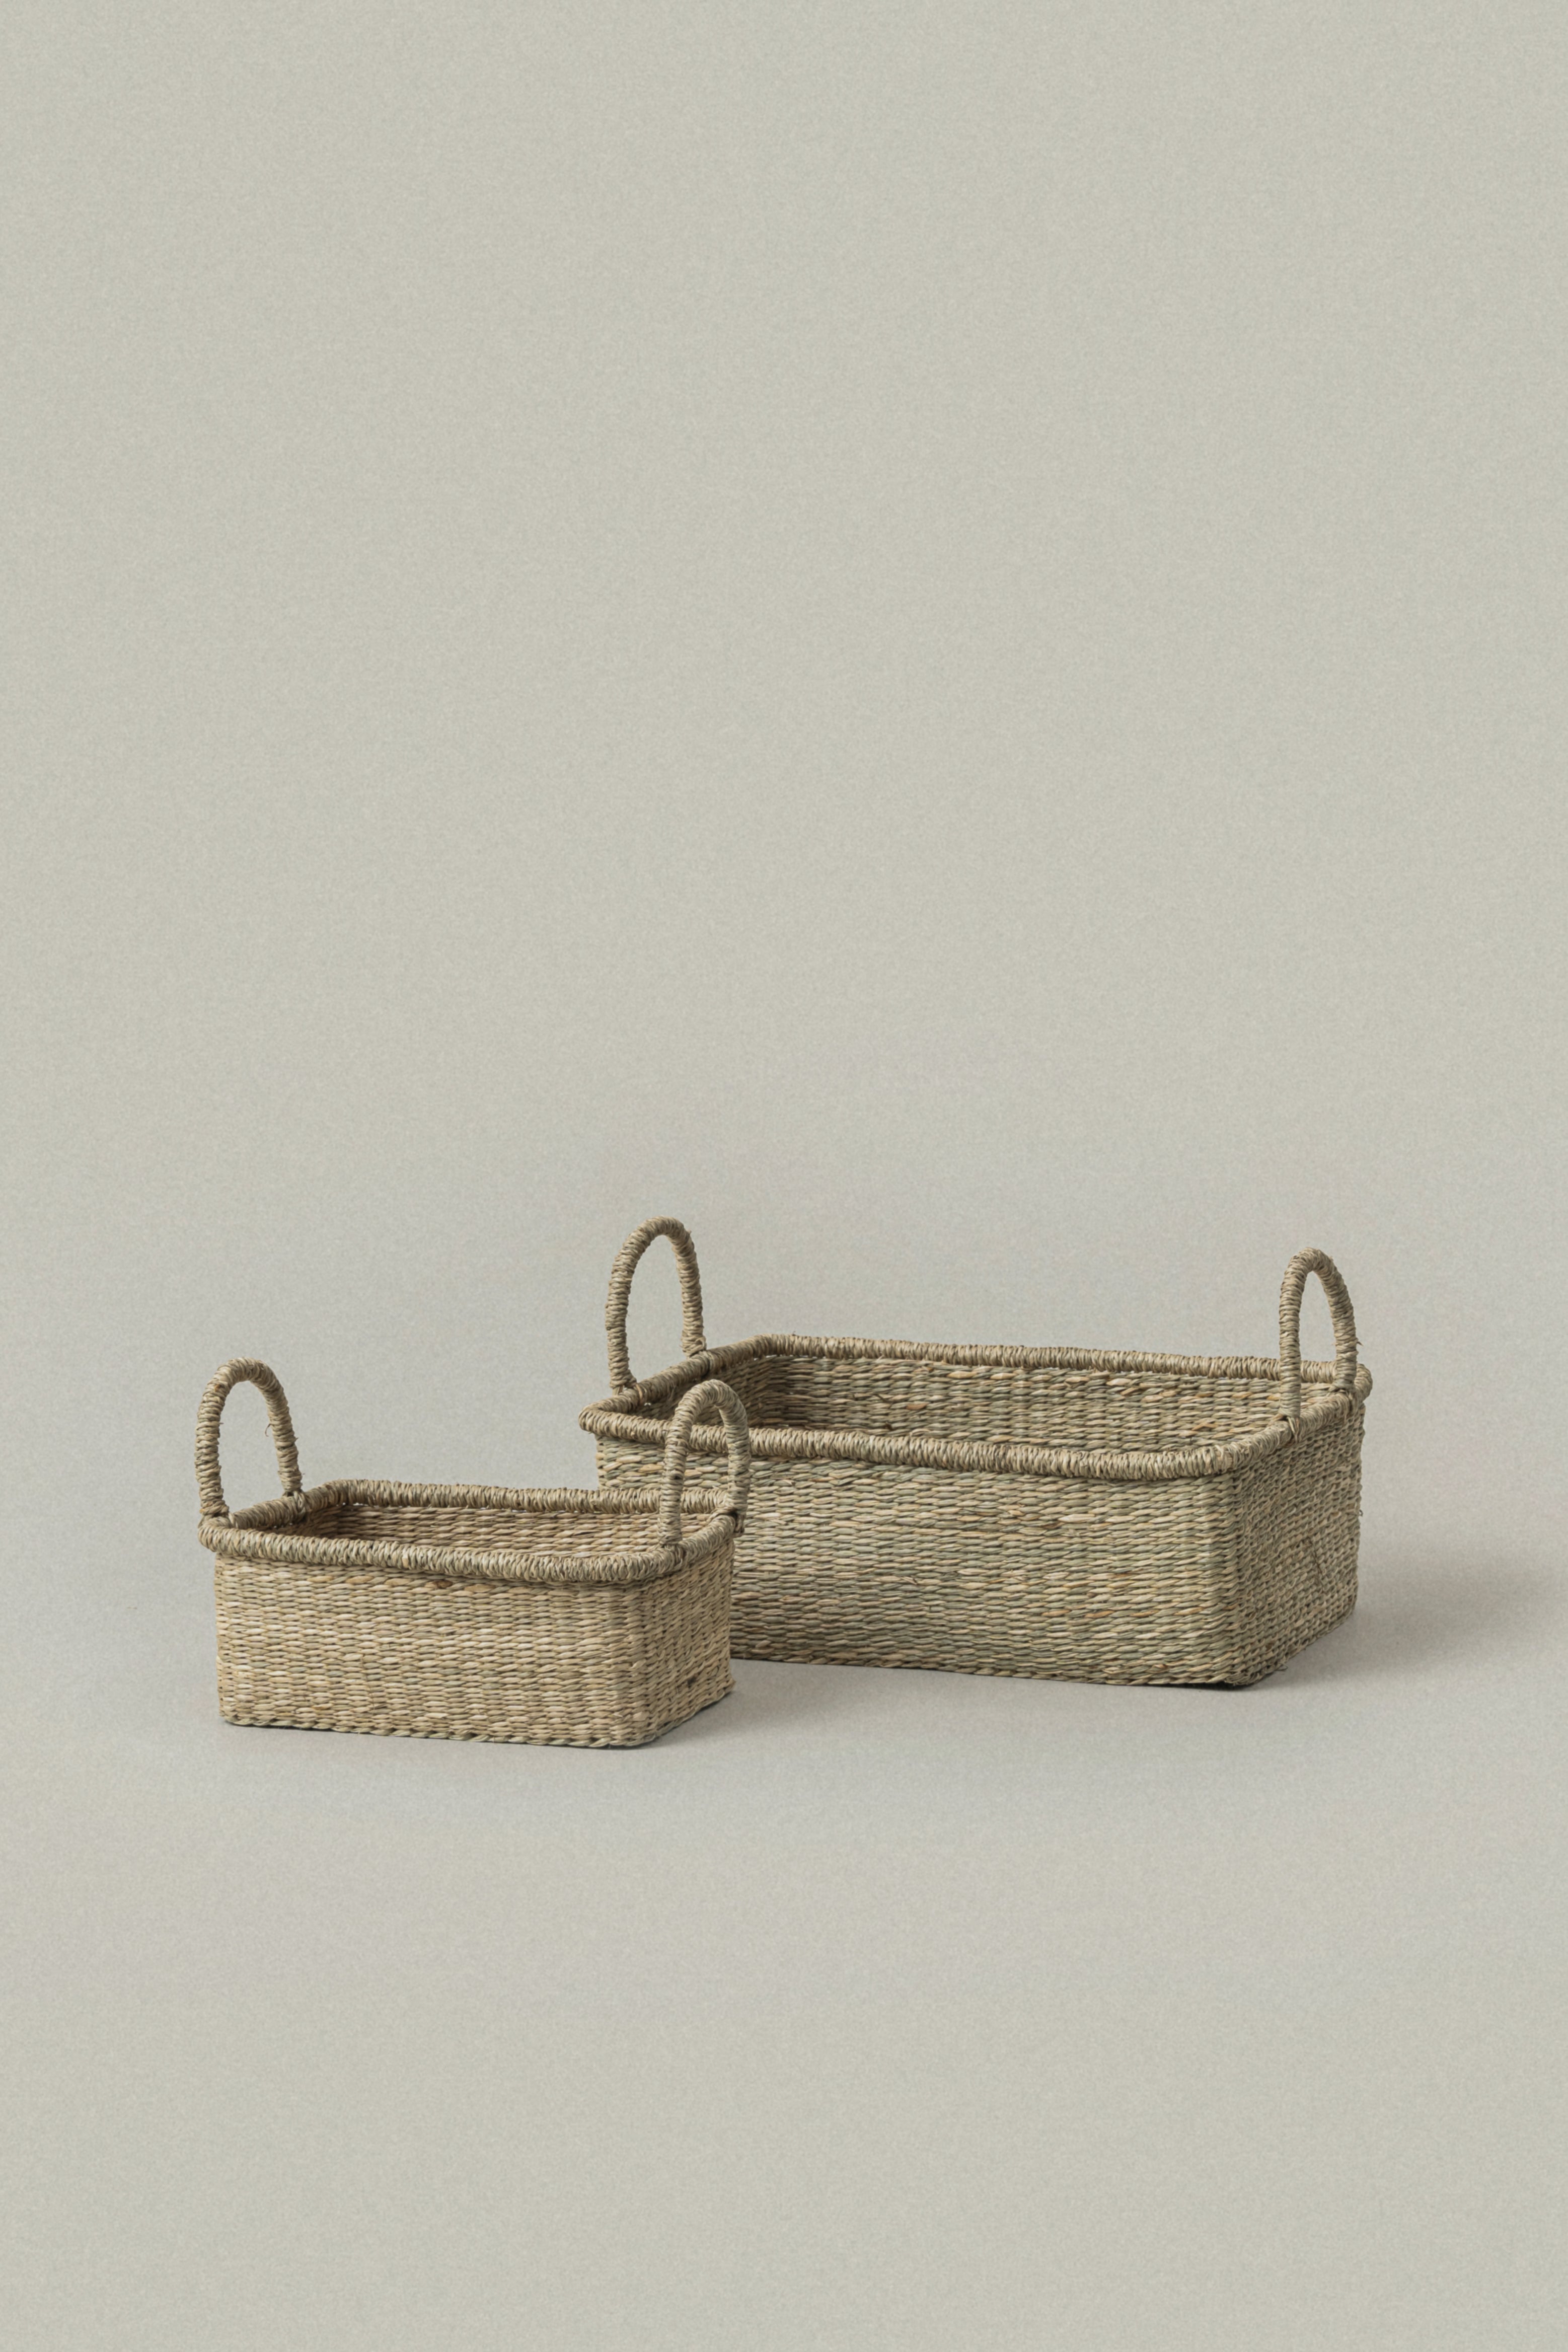 Lima Rectangular Seagrass Basket with Handles - Lima Rectangular Seagrass Basket with Handles